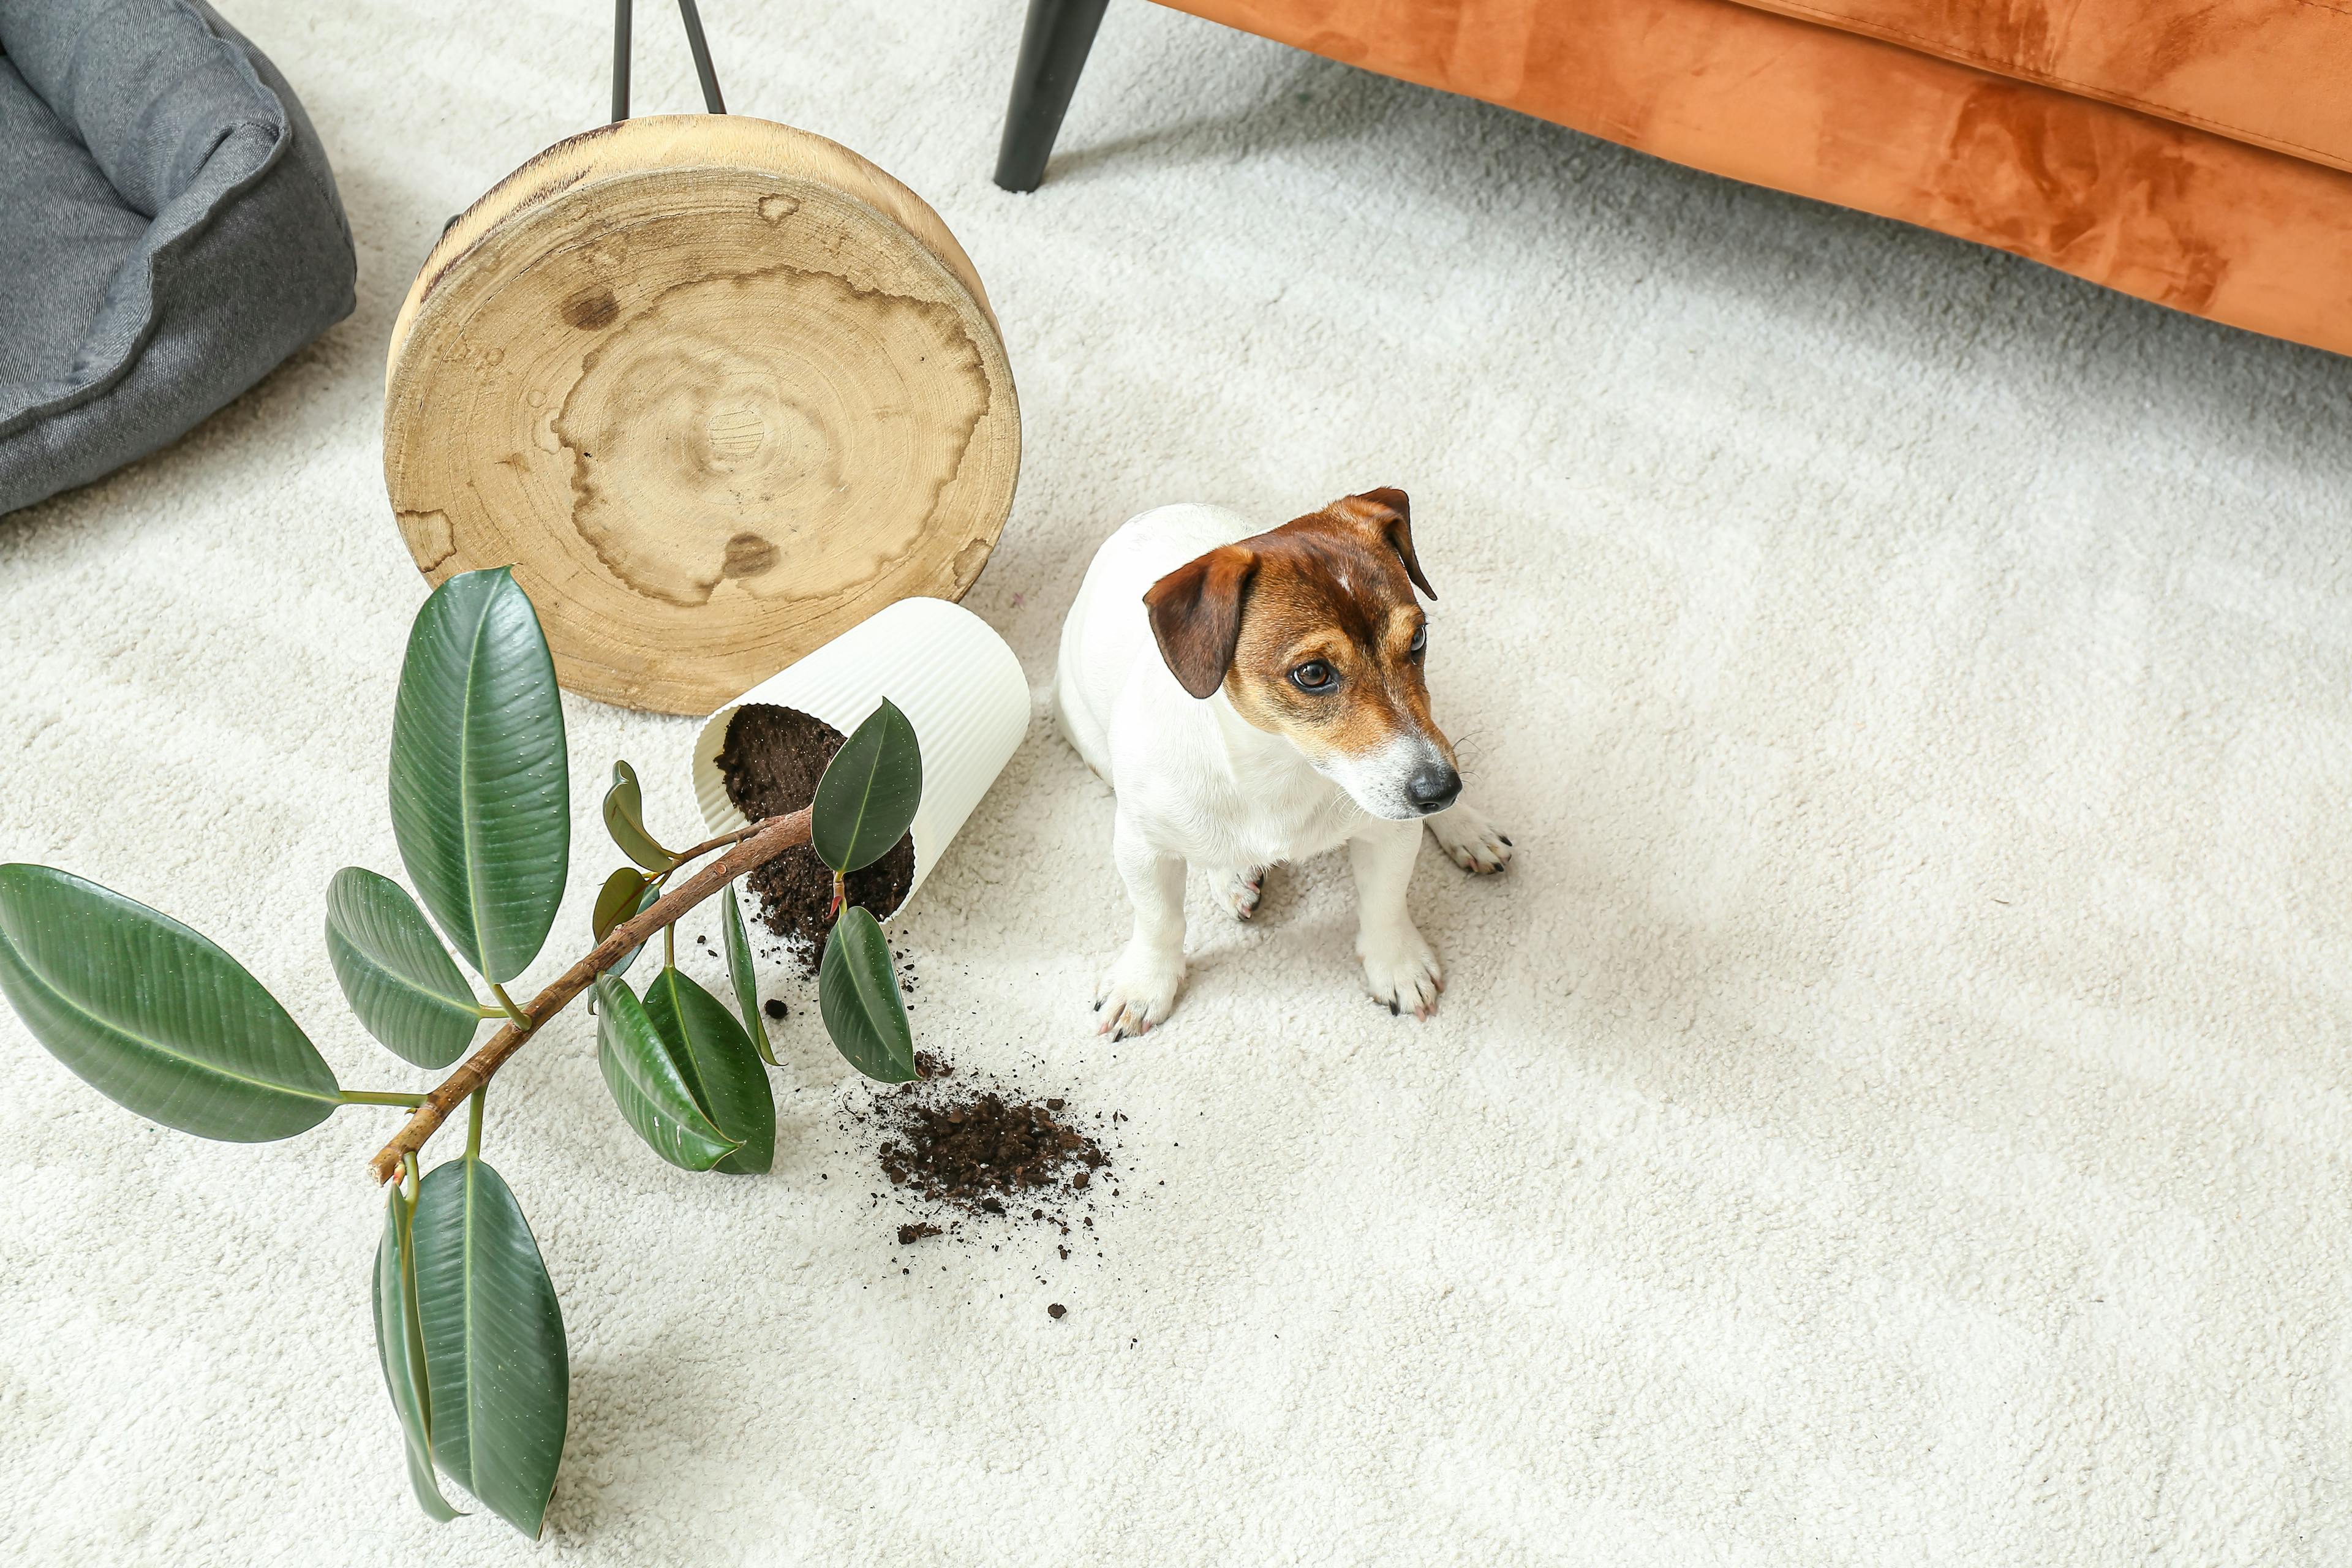 Stock photo of a dog knocking over a plant on carpet